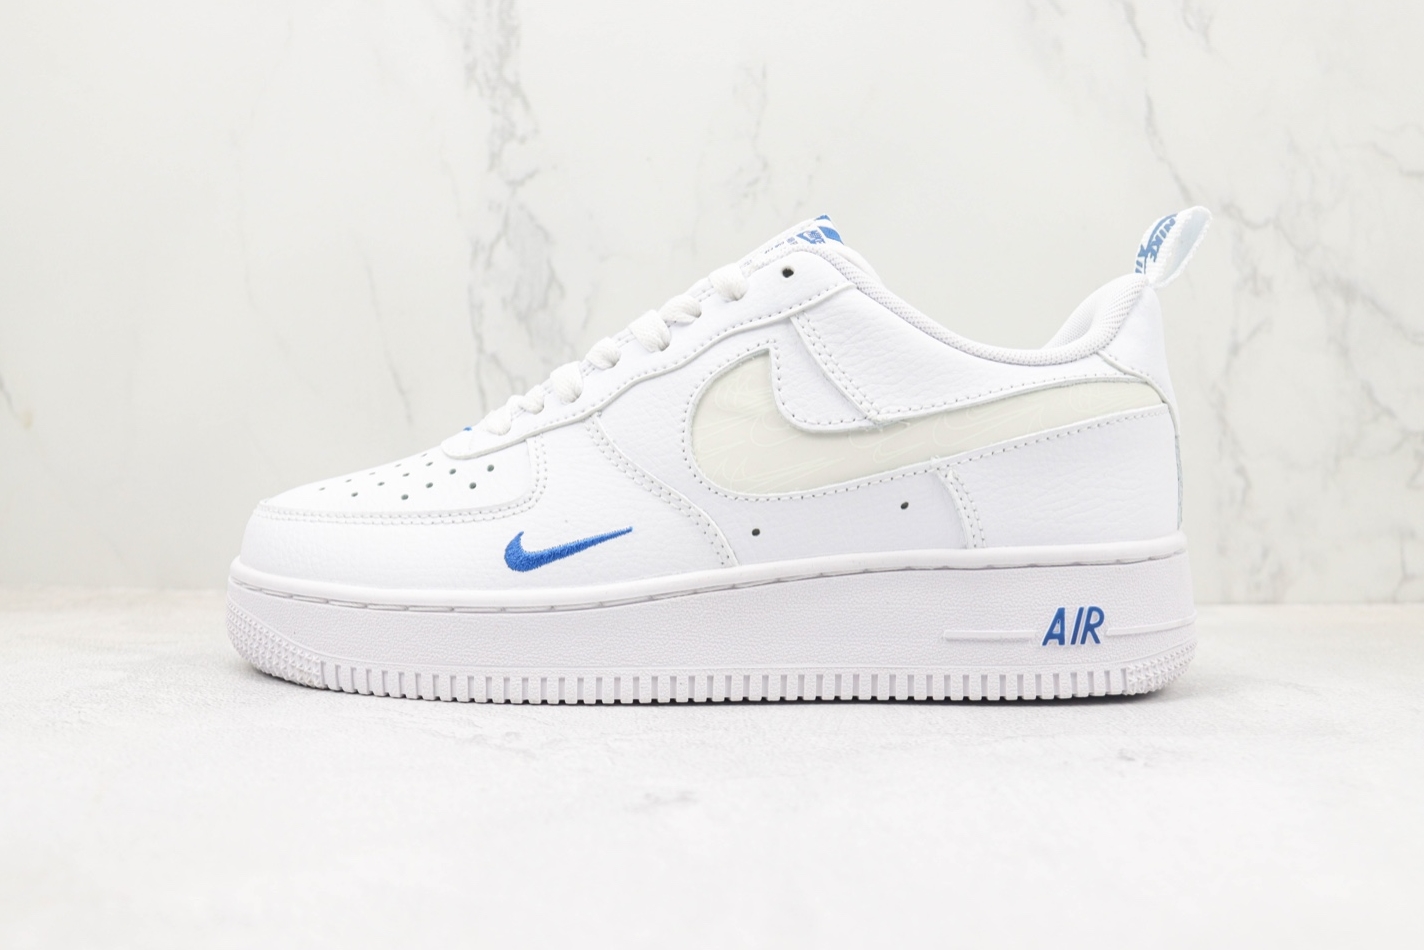 Nike Air Force 1 Low Reflective Swoosh White Blue FB8971-100 | Exclusive Release